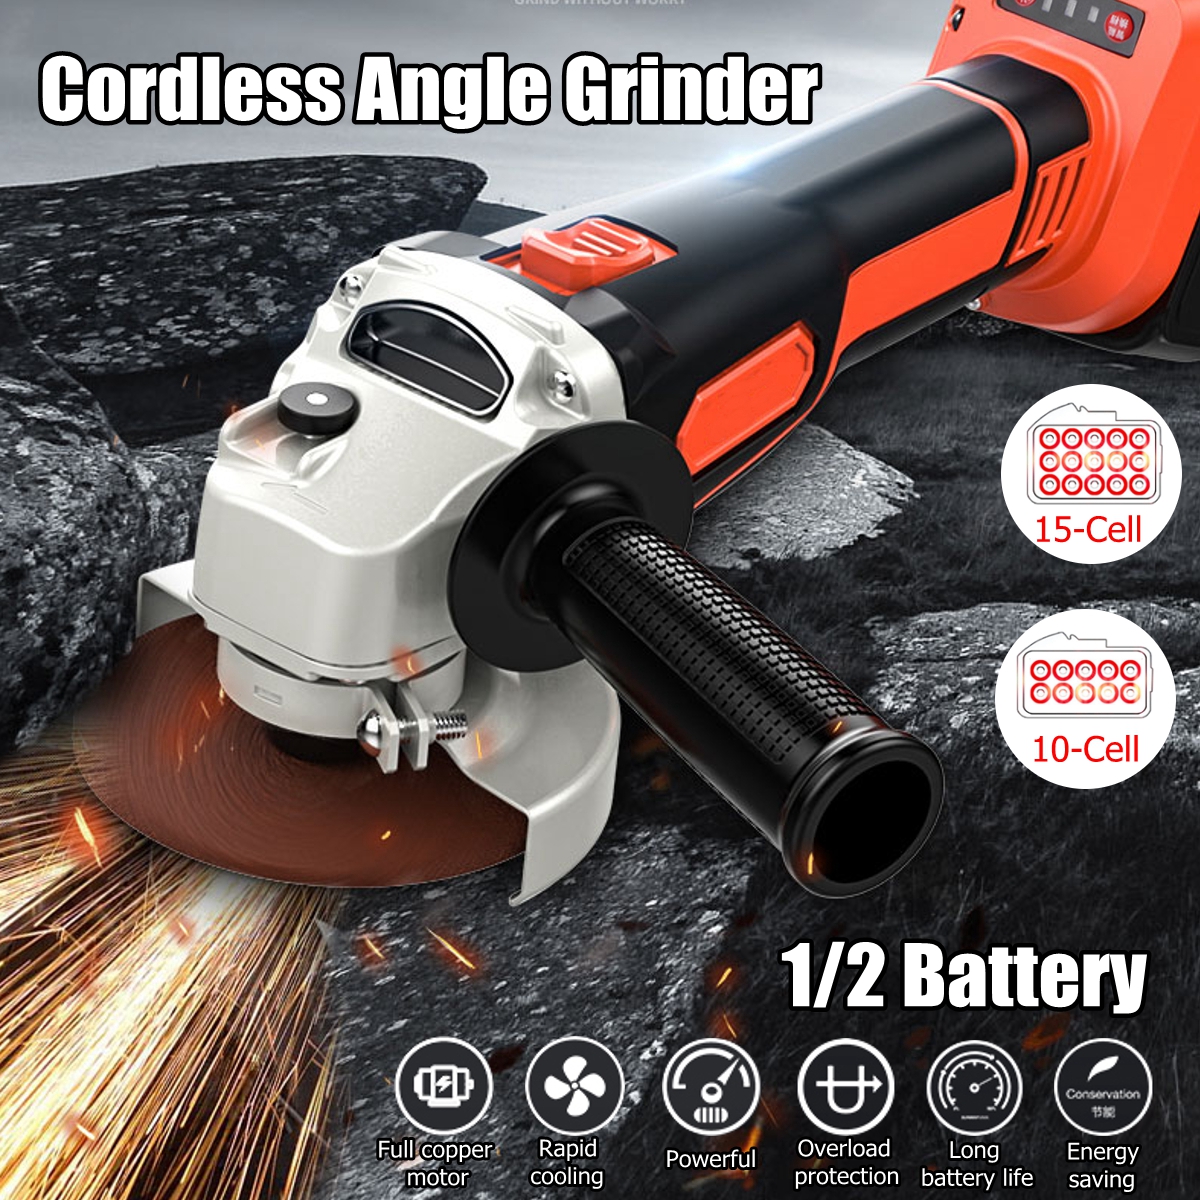 21800mah29800mah-Electric-Angle-Grinder-Lithium-Ion-Battery-Cut-Off-ToolGrinder-Cordless-Polisher-Po-1424117-1